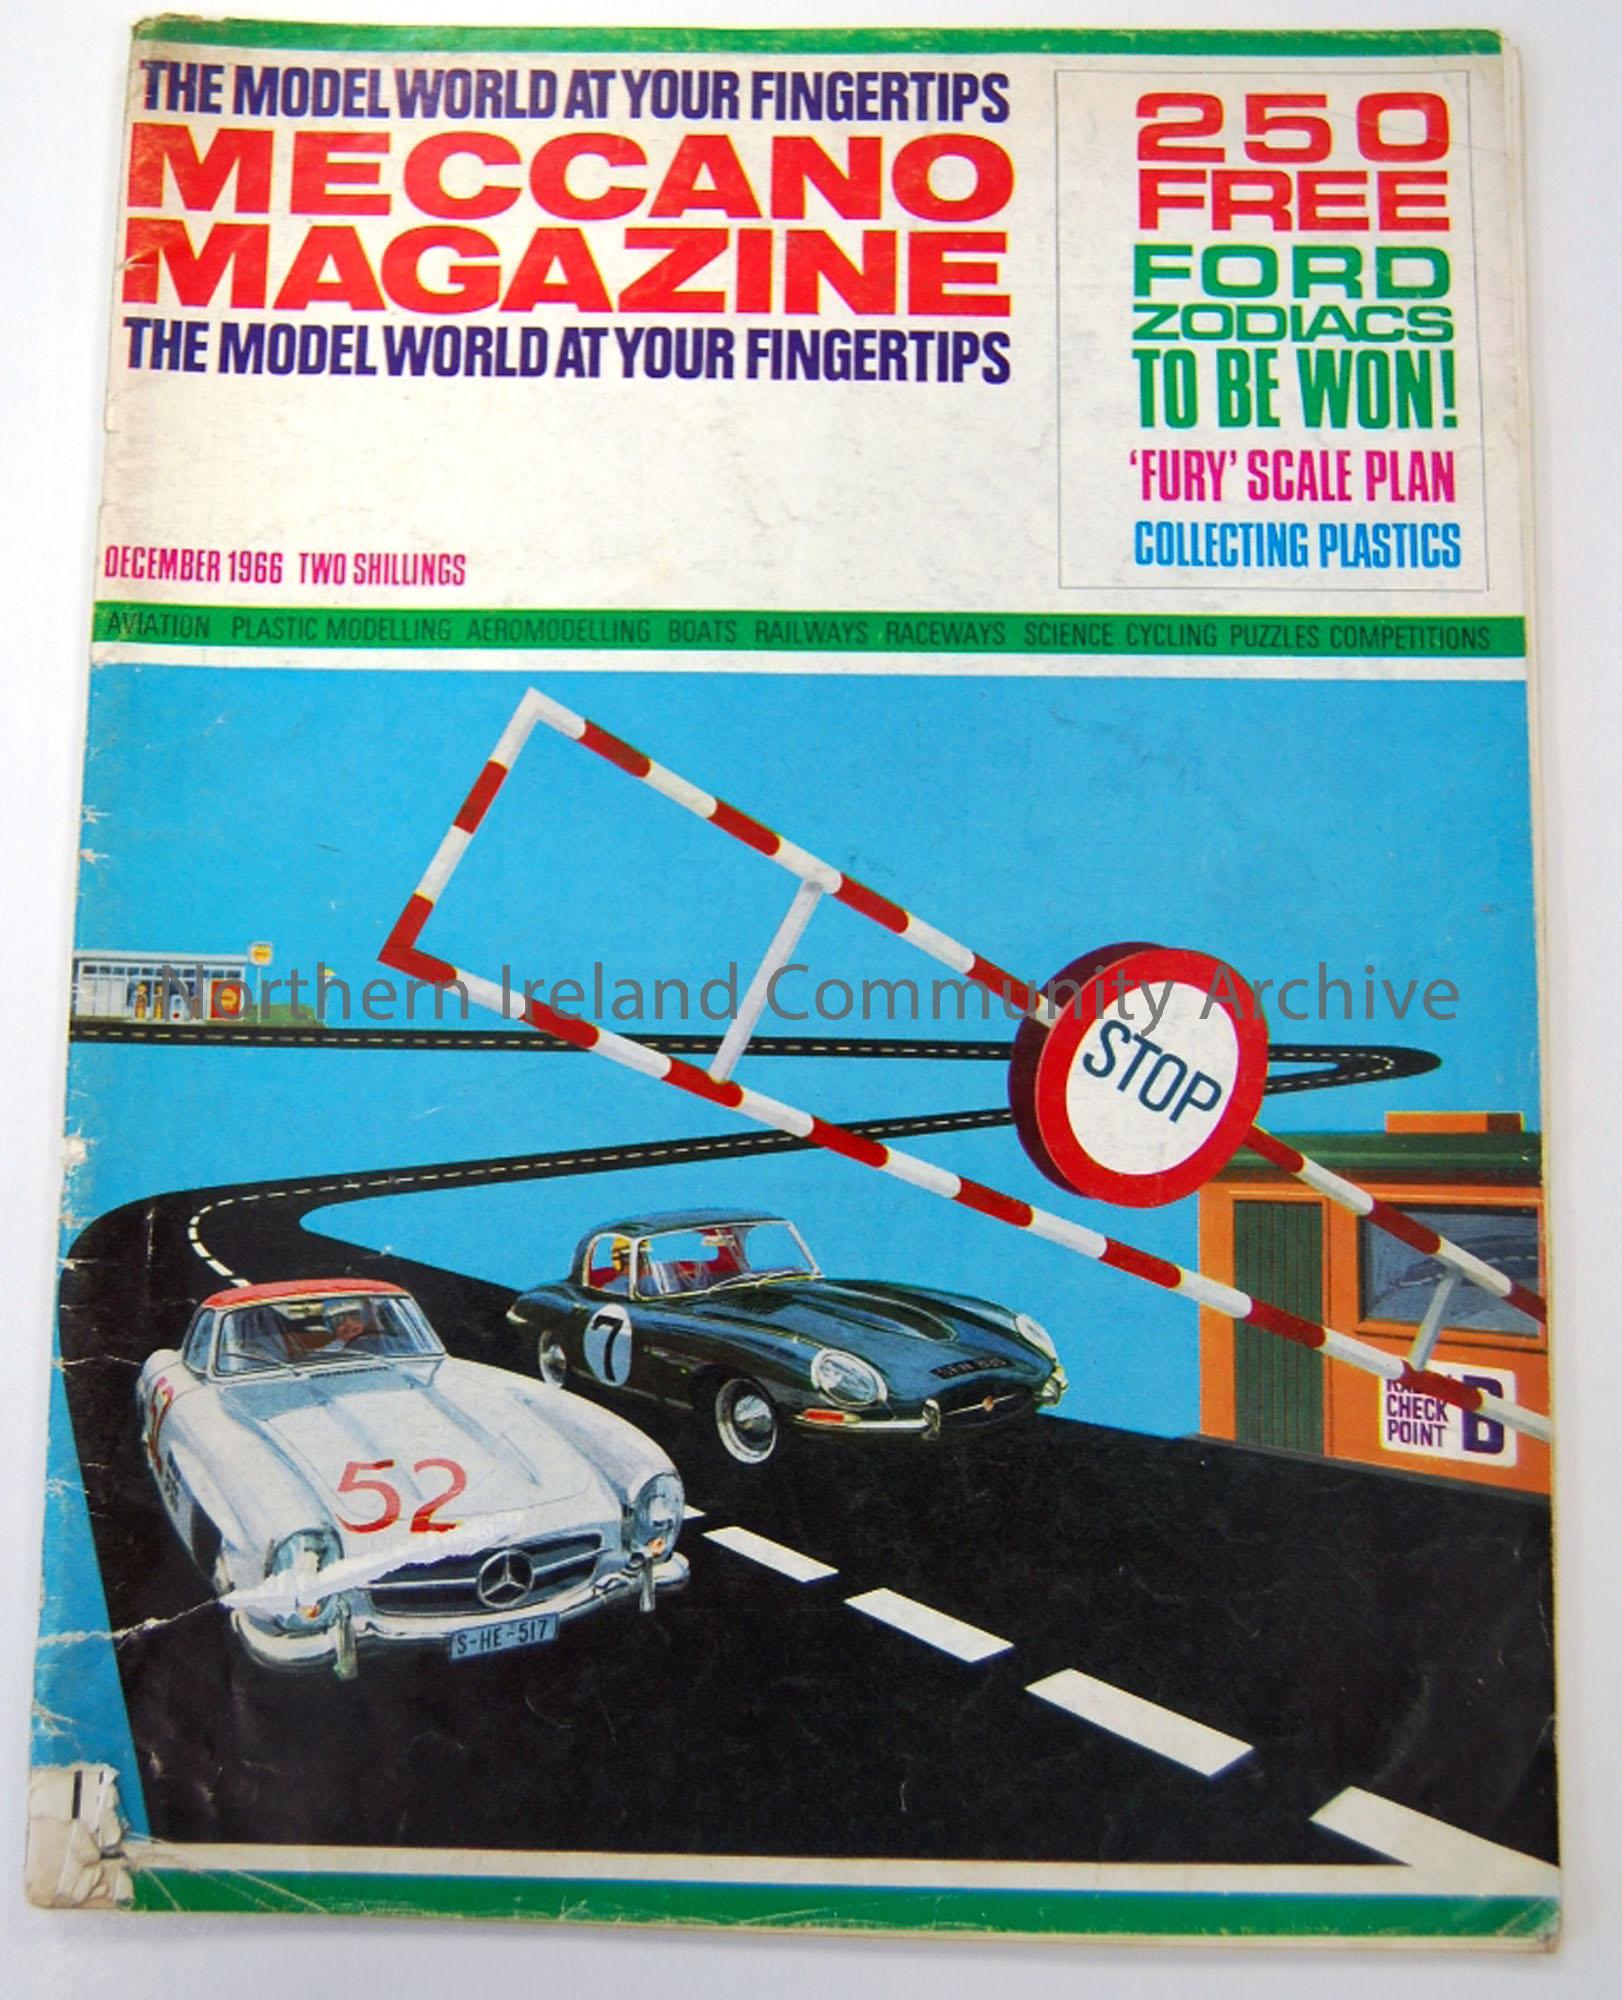 Meccano magazine, The model world at your fingertips. Decmber 1966. Price 2 shillings